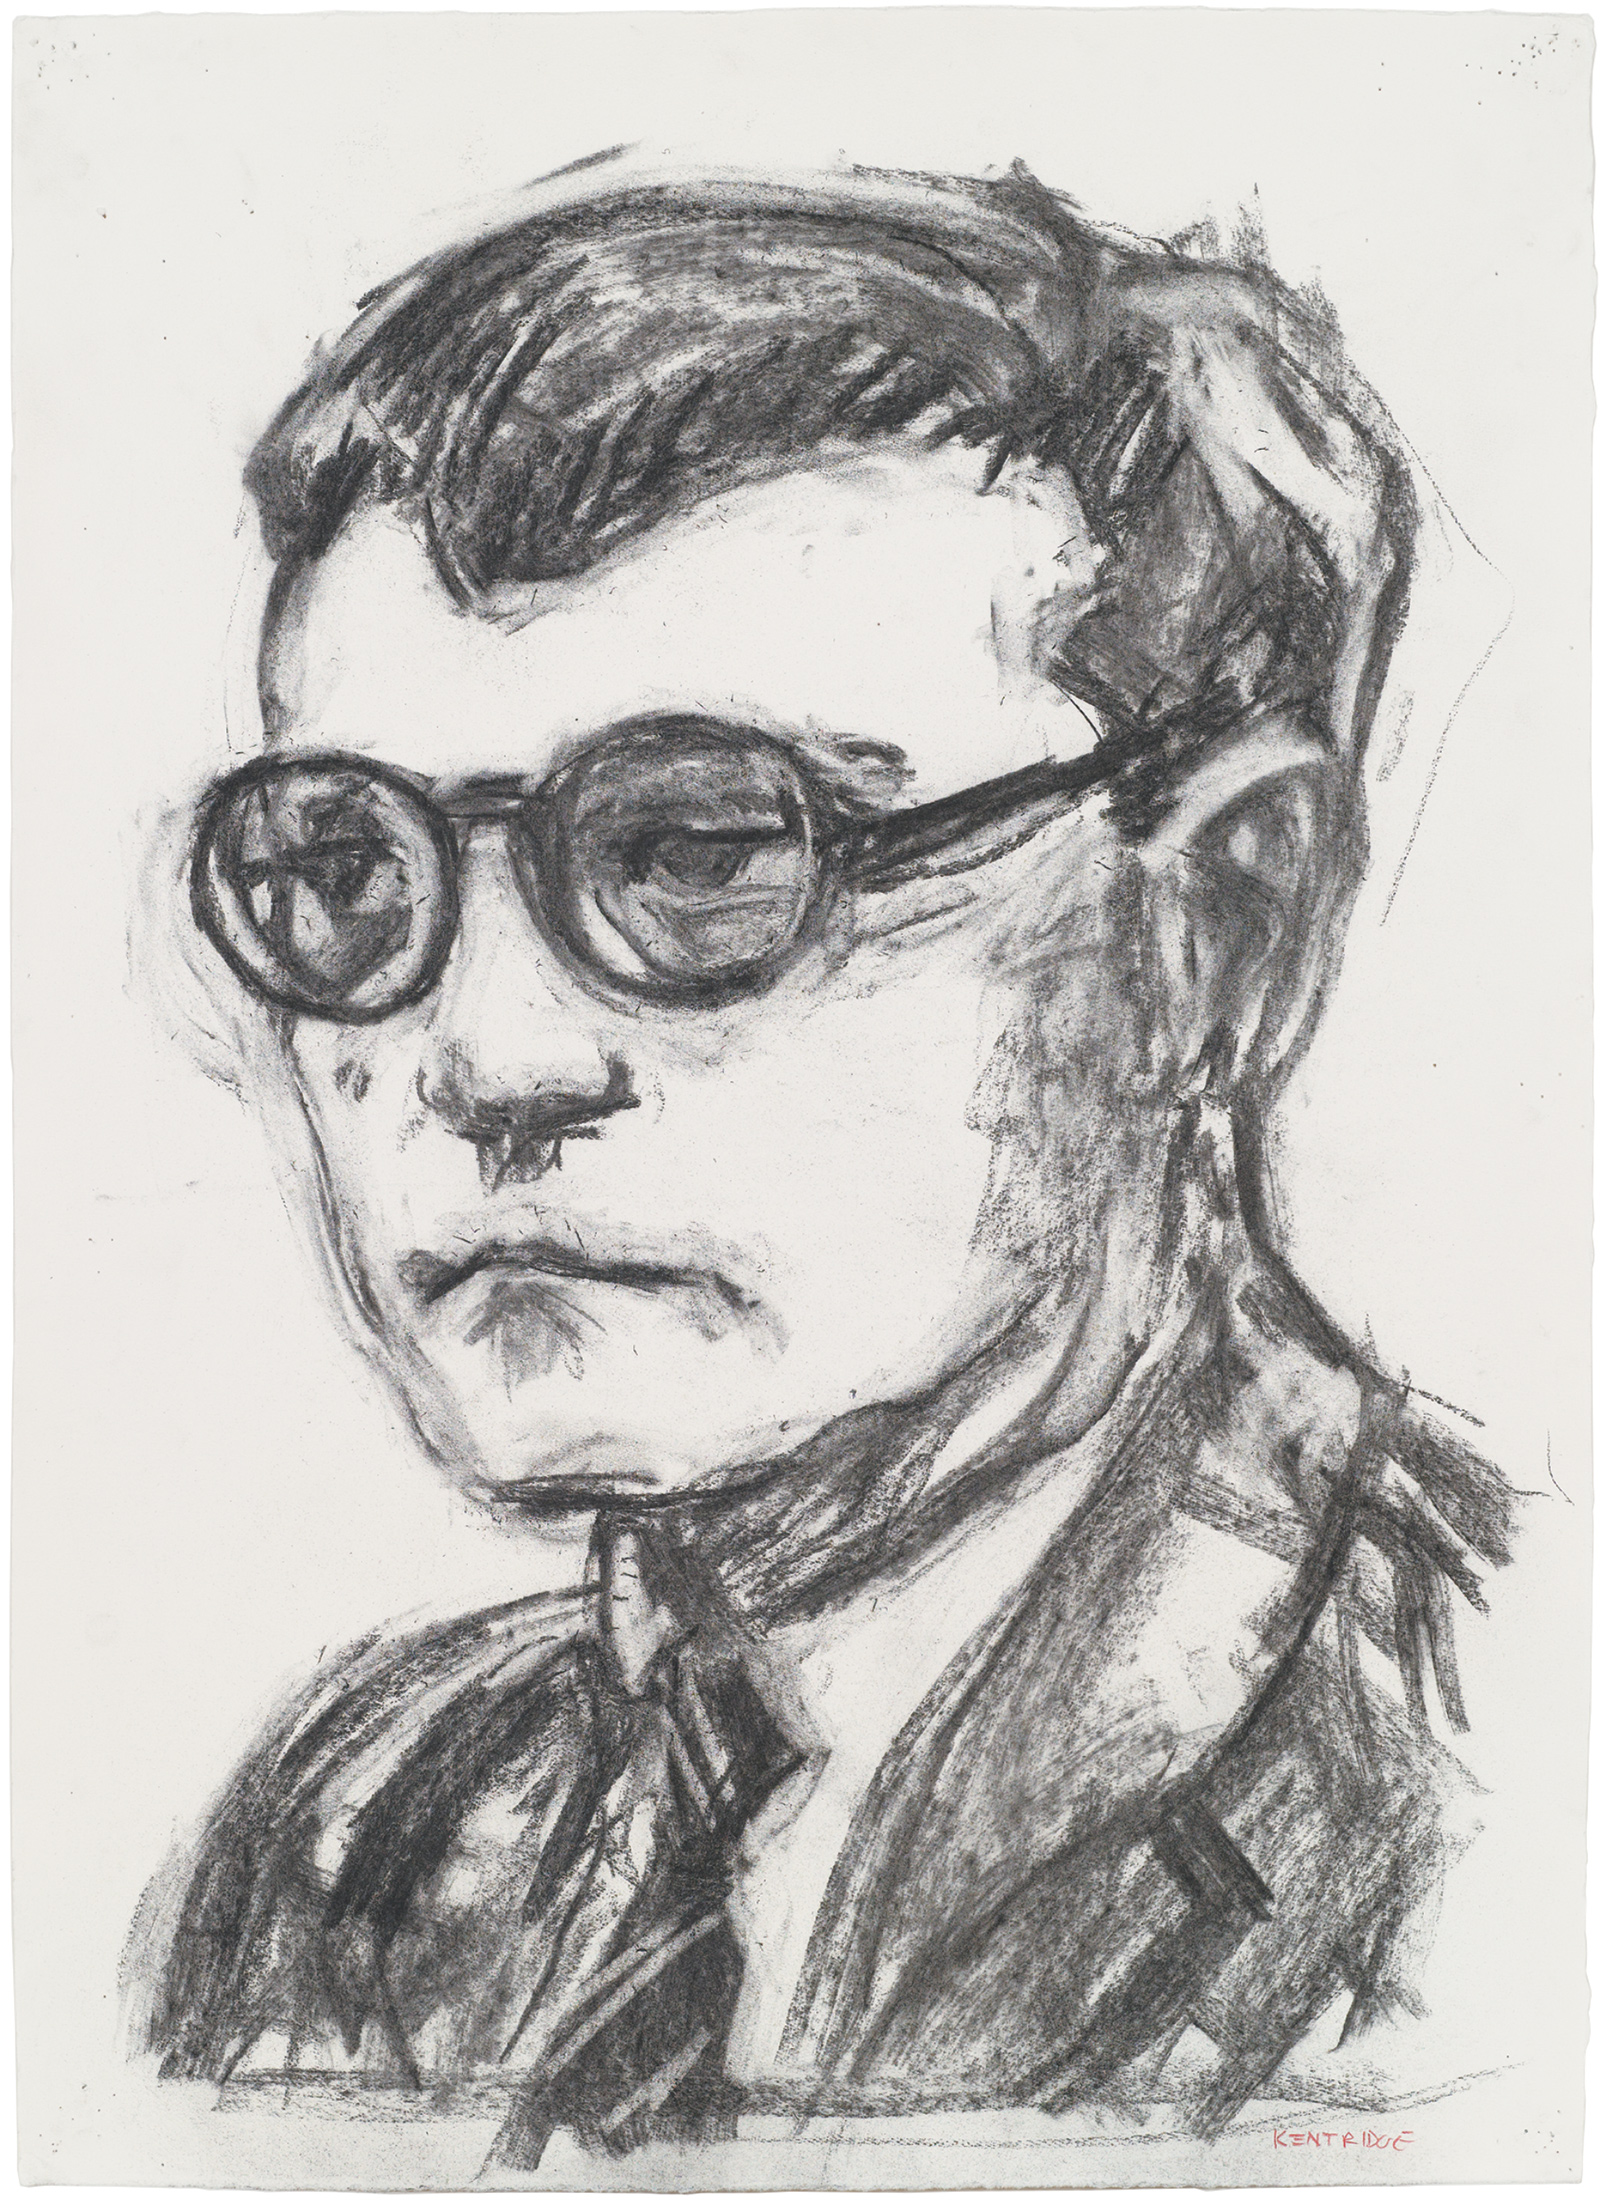 Dmitri Shostakovich; drawing by William Kentridge for his production of Shostakovich’s opera The Nose, 2009